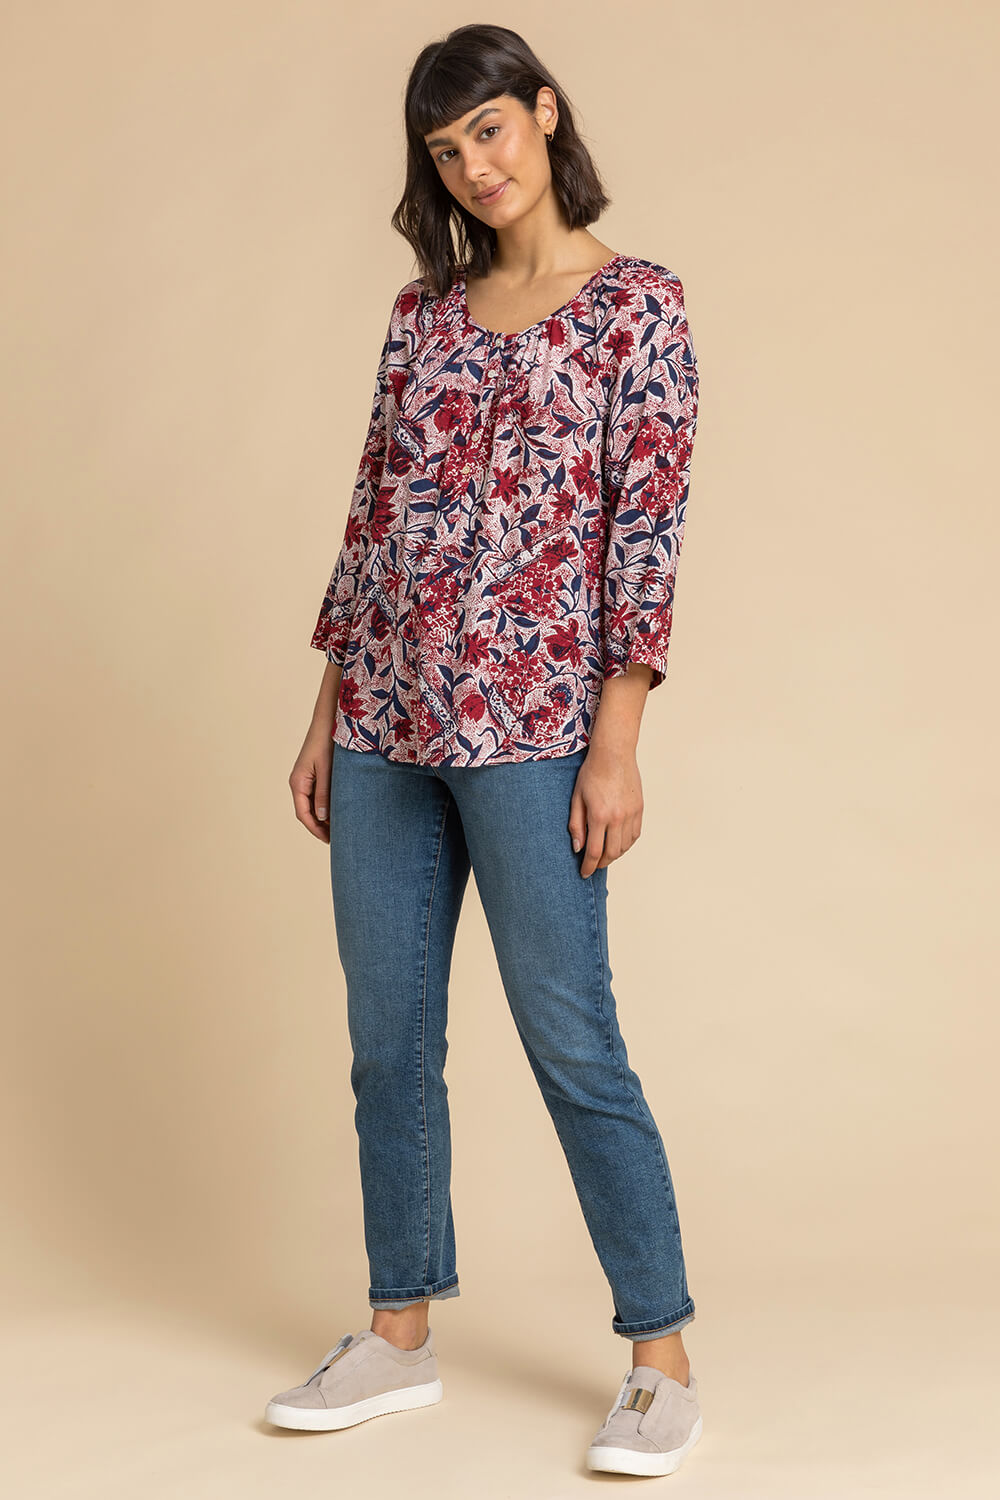 Red Floral Leaf Print Button Top, Image 3 of 4